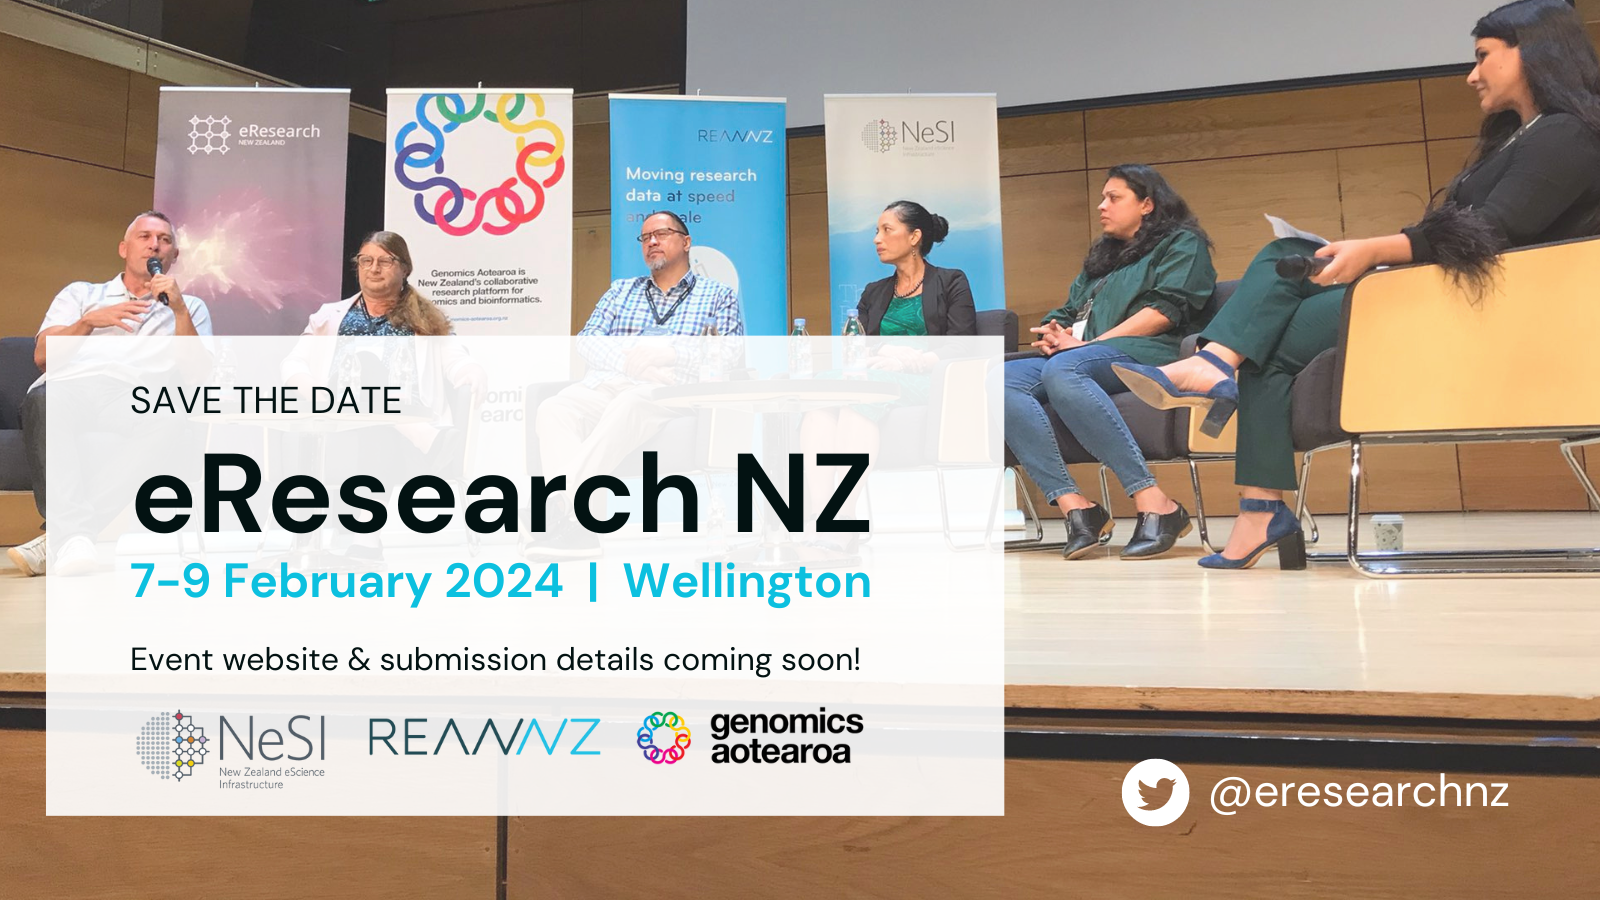 Save the date for eResearch NZ 2024 conference, happening 7-9 February 2024